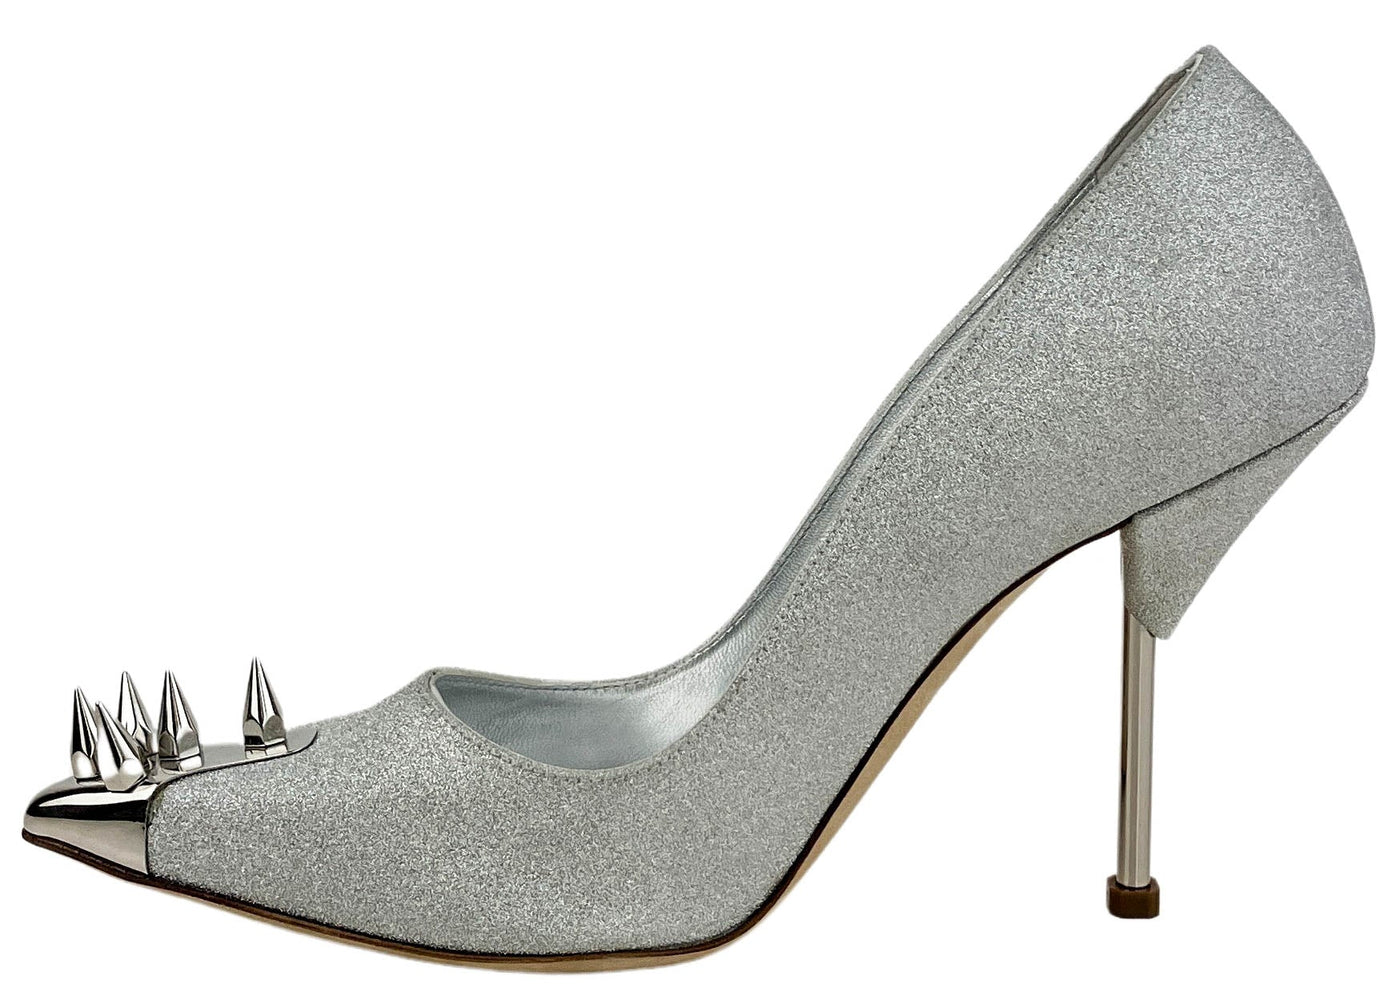 Alexander McQueen Punk Stud Pumps in White Silver - Discounts on Alexander McQueen at UAL